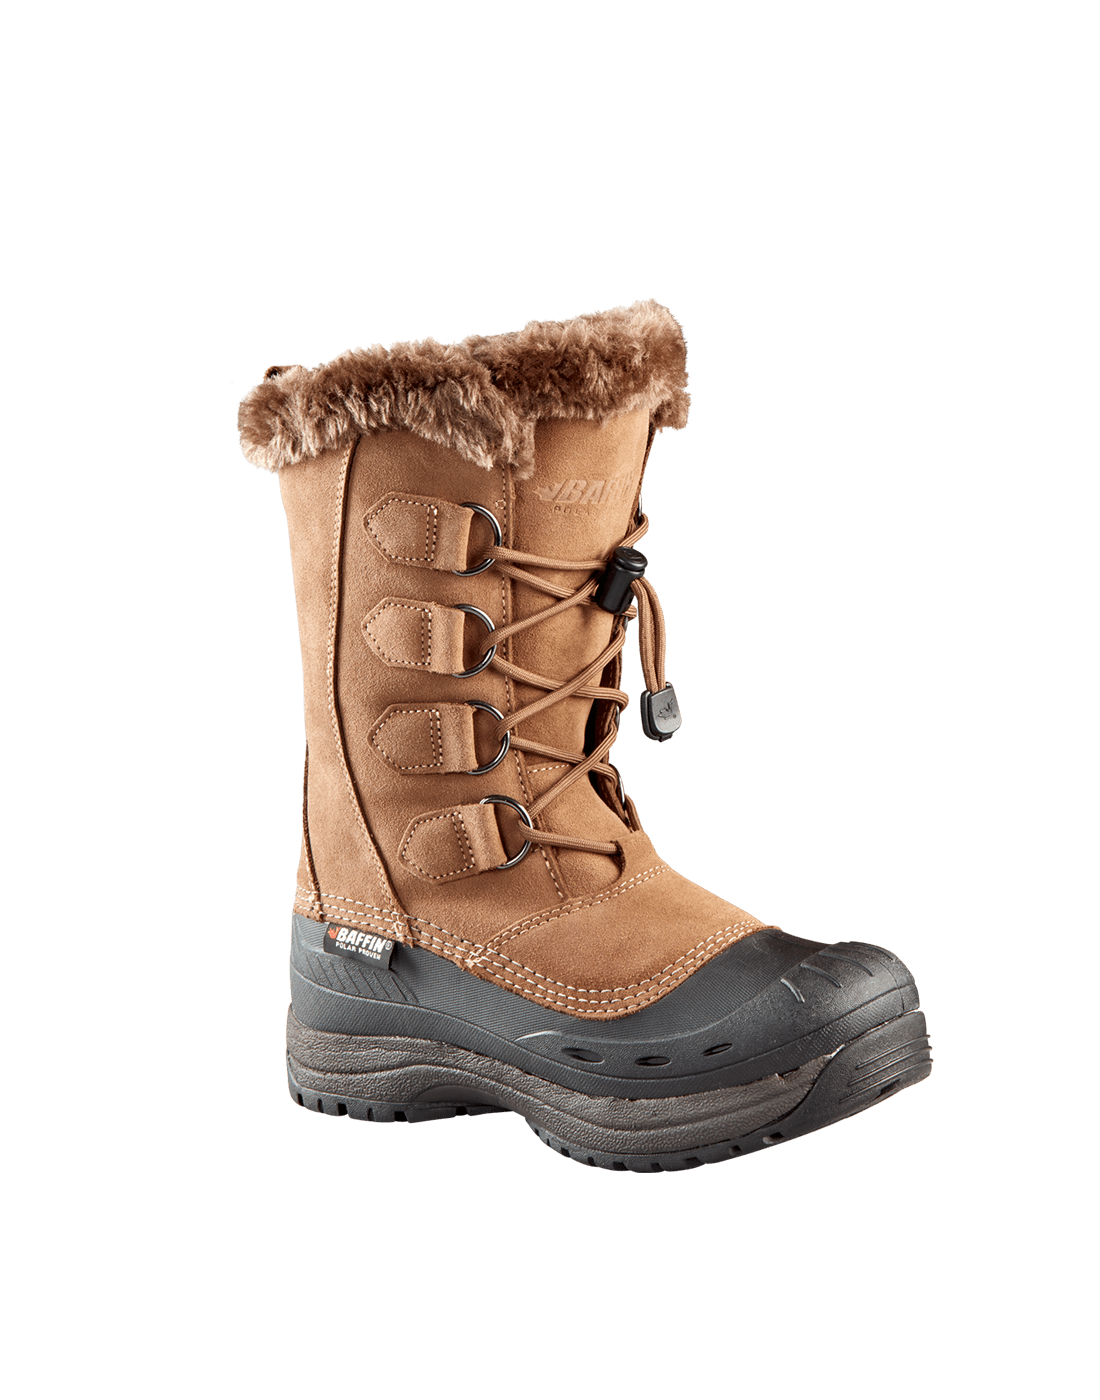 Western Powersports Boots Taupe / 6 Women's Chloe Boots by Baffin 4510-0185-BG4-06